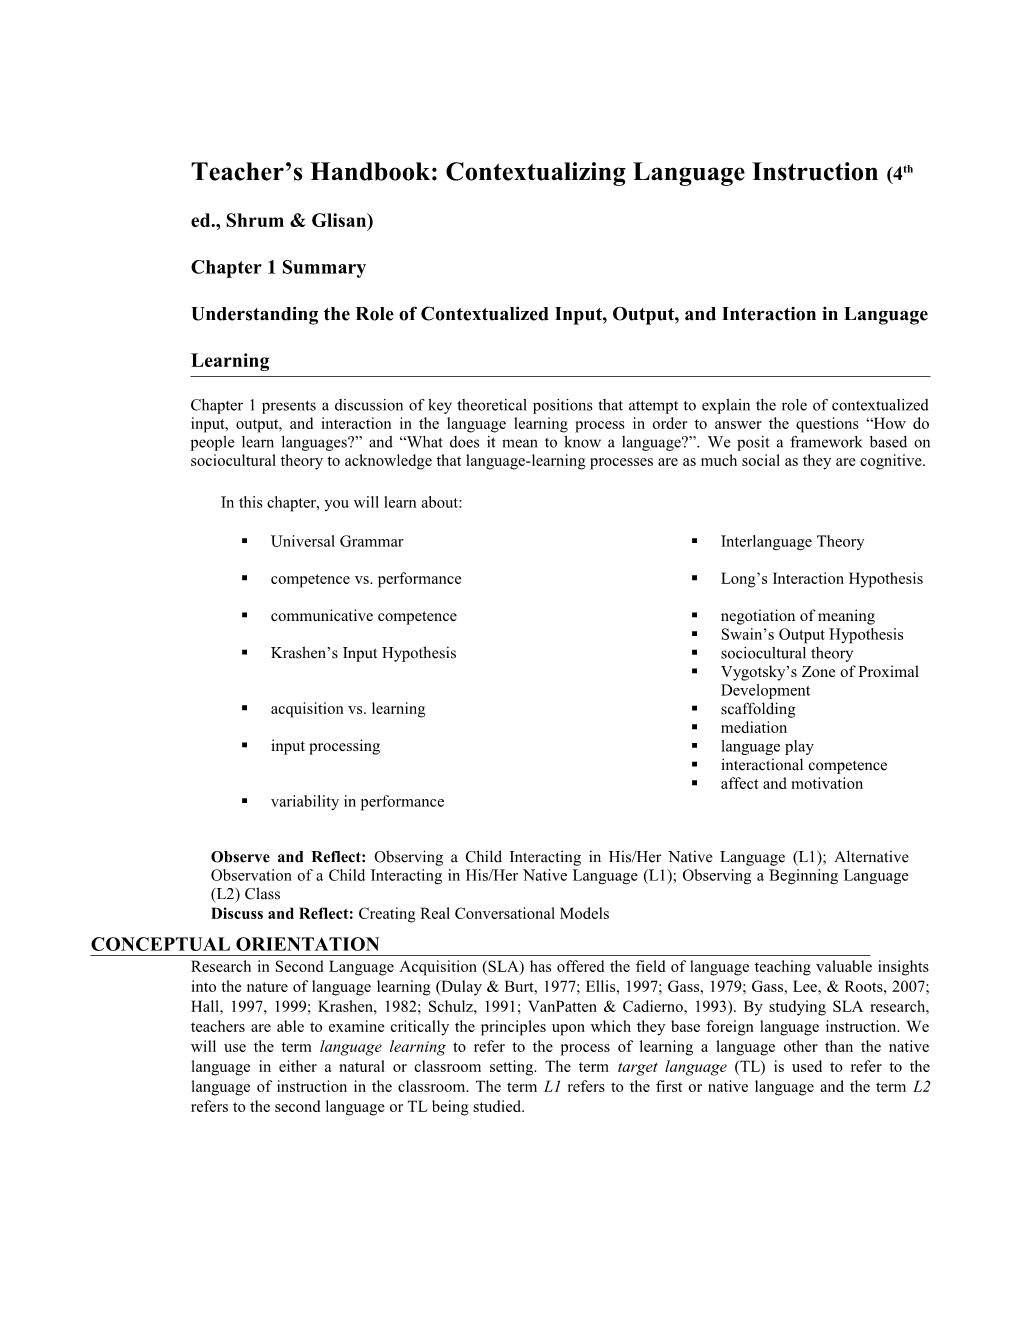 Understanding The Role Of Contextualized Input, Output, And Interaction In Language Learning